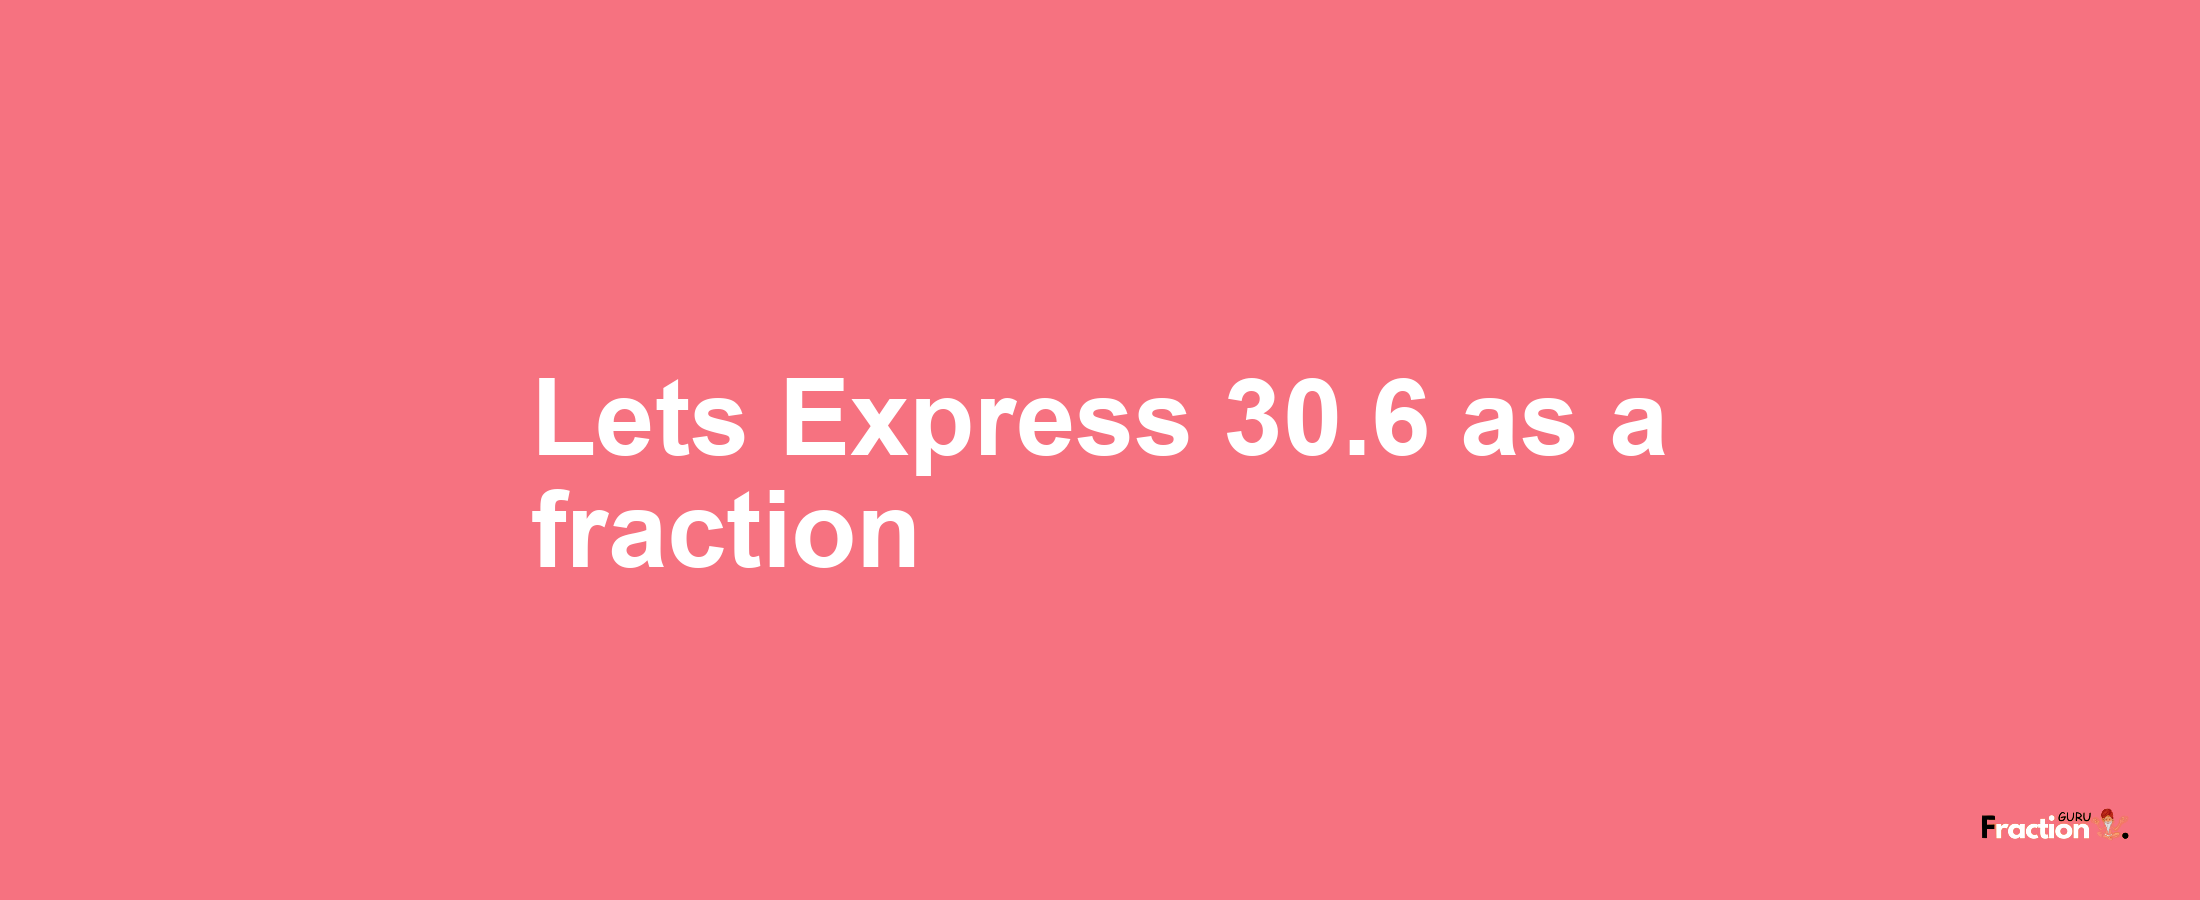 Lets Express 30.6 as afraction